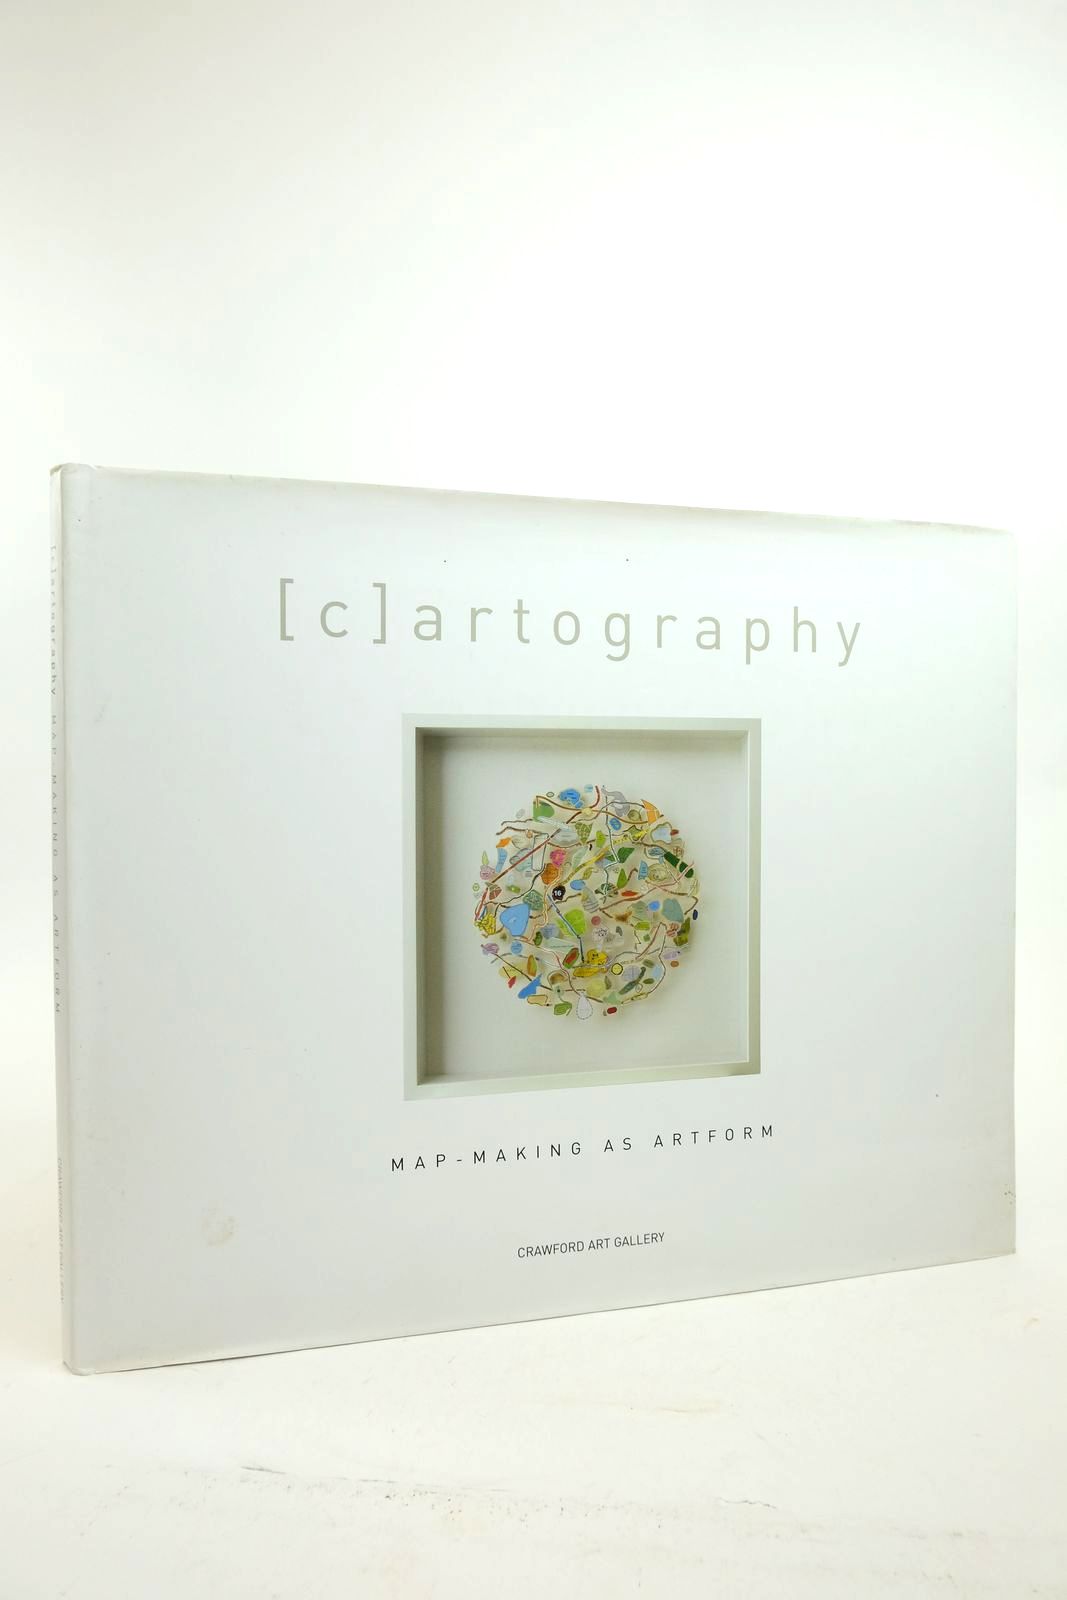 Photo of [C]ARTOGRAPHY MAP-MAKING AS ARTFORM written by Smyth, William J. Laffan, William Moroney, Mic published by Crawford Art Gallery, Raven Design (STOCK CODE: 2140852)  for sale by Stella & Rose's Books